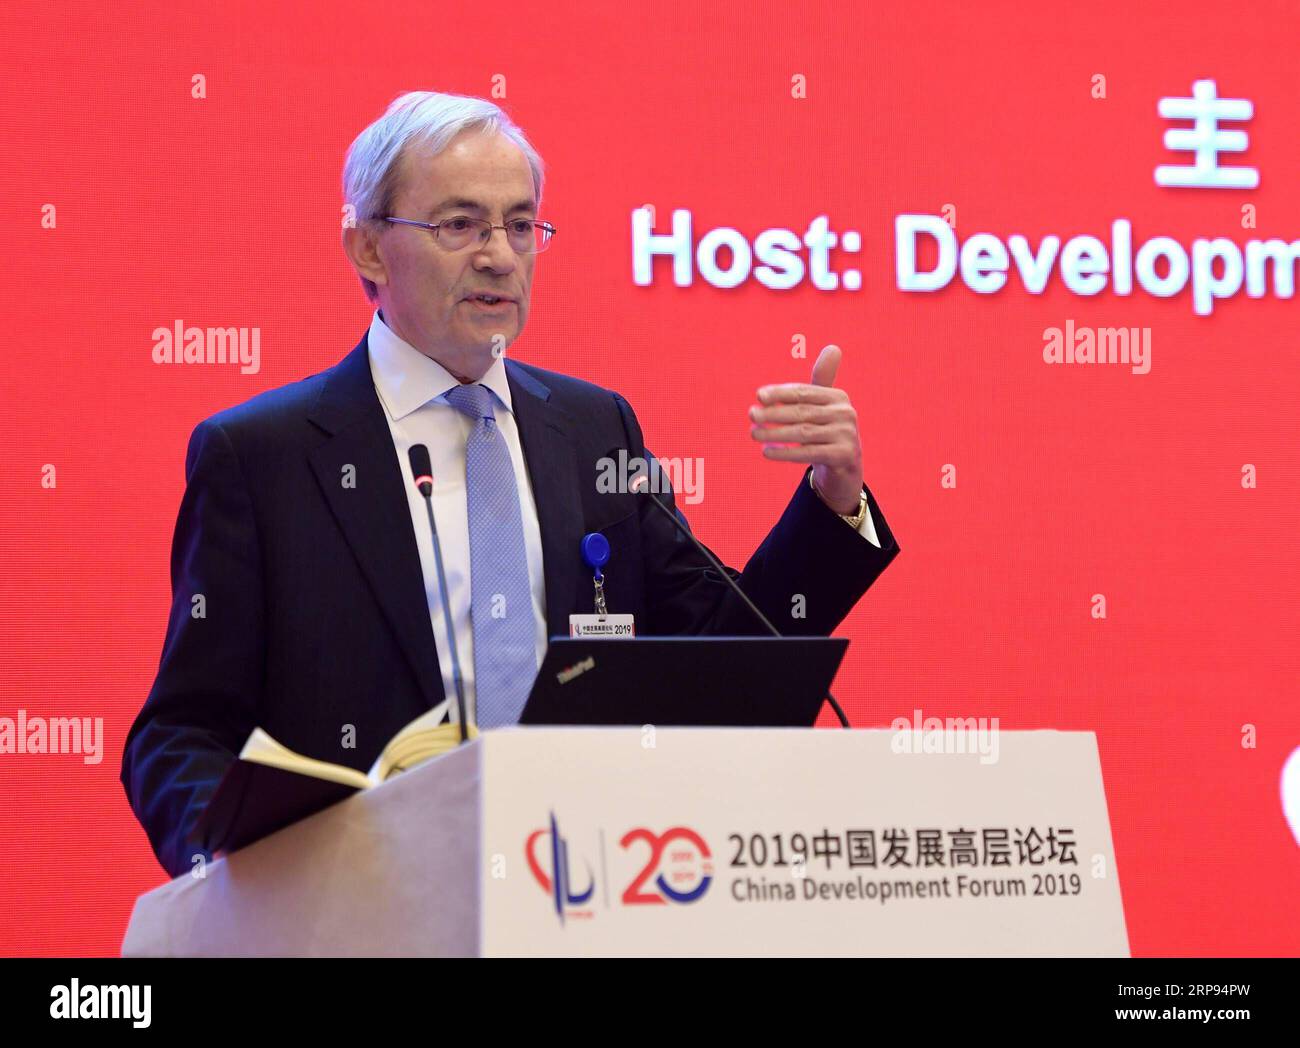 (190323) -- BEIJING, March 23, 2019 -- Christoforos Pissarides, professor of the London School of Economics and Political Science and Nobel Prize winner, speaks at the Economic Summit of China Development Forum 2019 in Beijing, capital of China, March 23, 2019. The three-day China Development Forum, which kicked off Saturday, will focus on key issues such as the supply-side structural reform, new measures of proactive fiscal policy, and the opening-up of the financial sector and financial stability. More than 50 officials from the Chinese central government s departments and over 150 overseas Stock Photo